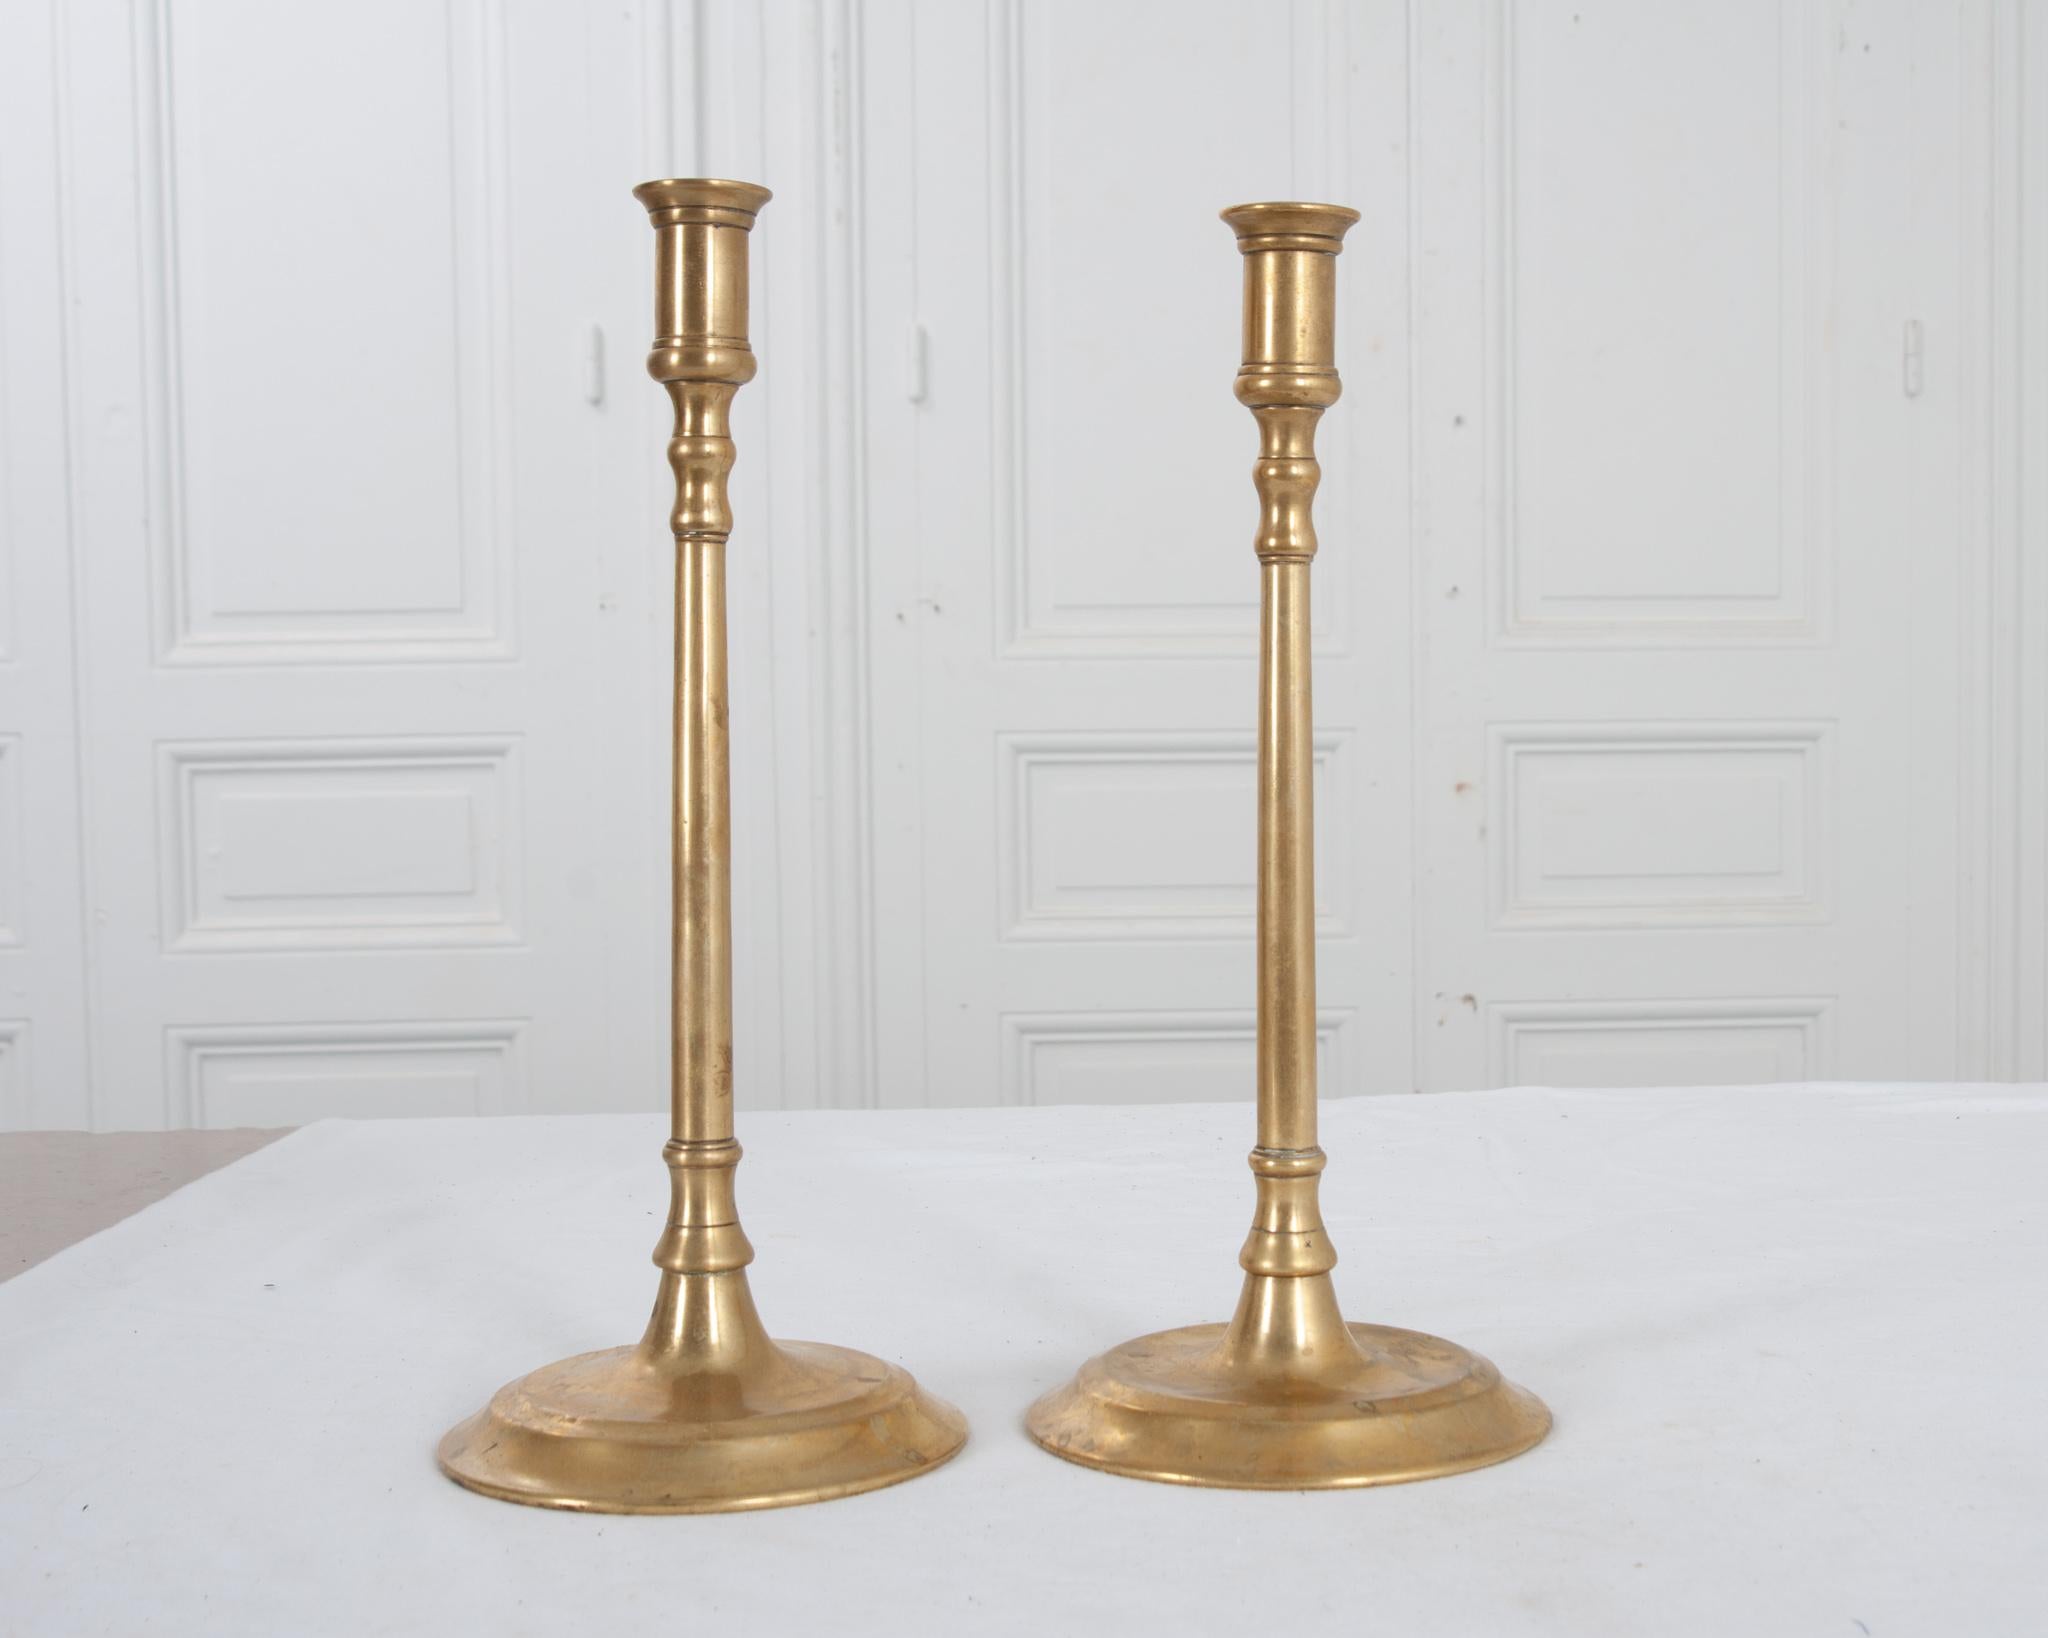 Pair of Tall 19th Century Brass Candle Holders In Good Condition For Sale In Baton Rouge, LA